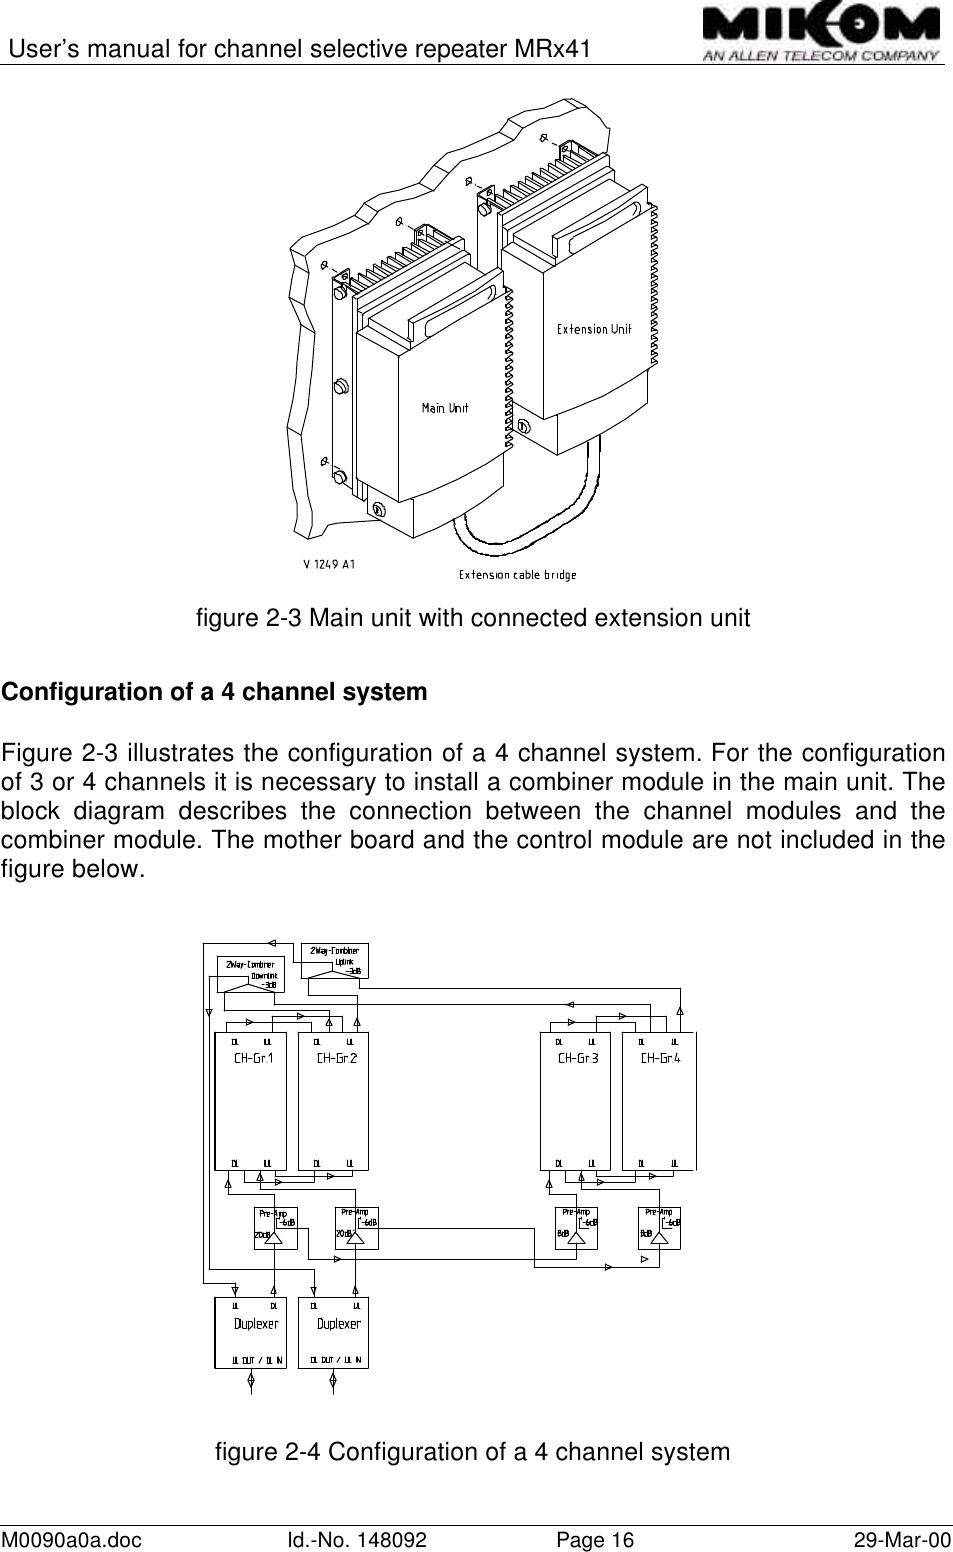 User’s manual for channel selective repeater MRx41M0090a0a.doc Id.-No. 148092 Page 16 29-Mar-00figure 2-3 Main unit with connected extension unitConfiguration of a 4 channel systemFigure 2-3 illustrates the configuration of a 4 channel system. For the configurationof 3 or 4 channels it is necessary to install a combiner module in the main unit. Theblock diagram describes the connection between the channel modules and thecombiner module. The mother board and the control module are not included in thefigure below.figure 2-4 Configuration of a 4 channel system